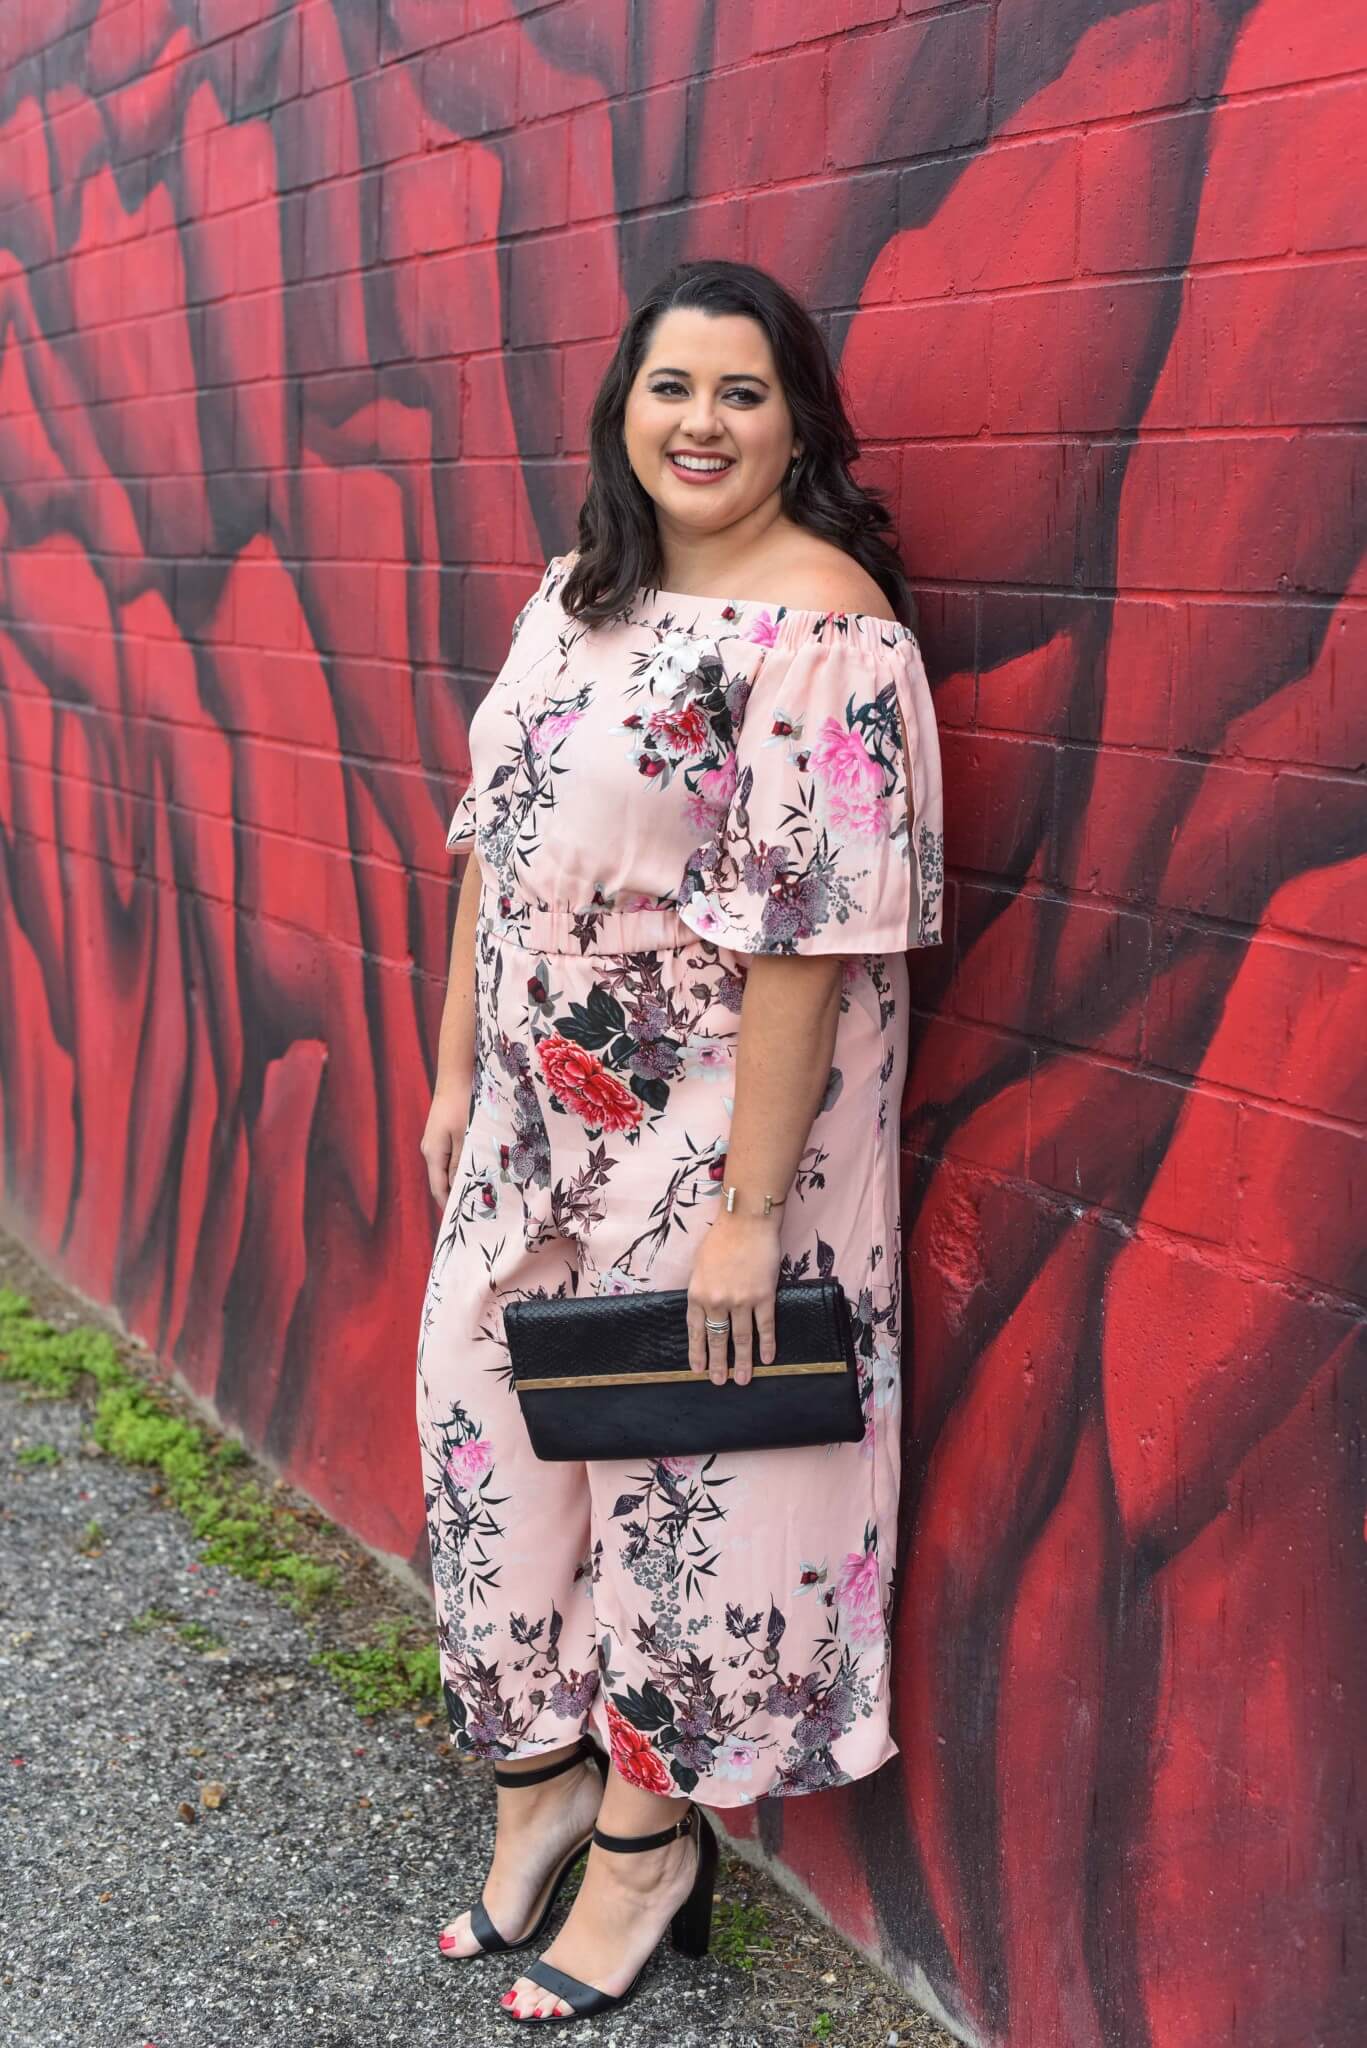 Spring style, how to wear a jumpsuit, how to rock an off the shoulder jumpsuit, off the shoulder, jumpsuit, body positivity, body confidence, confidence, change, love yourself, body positive, confident woman 